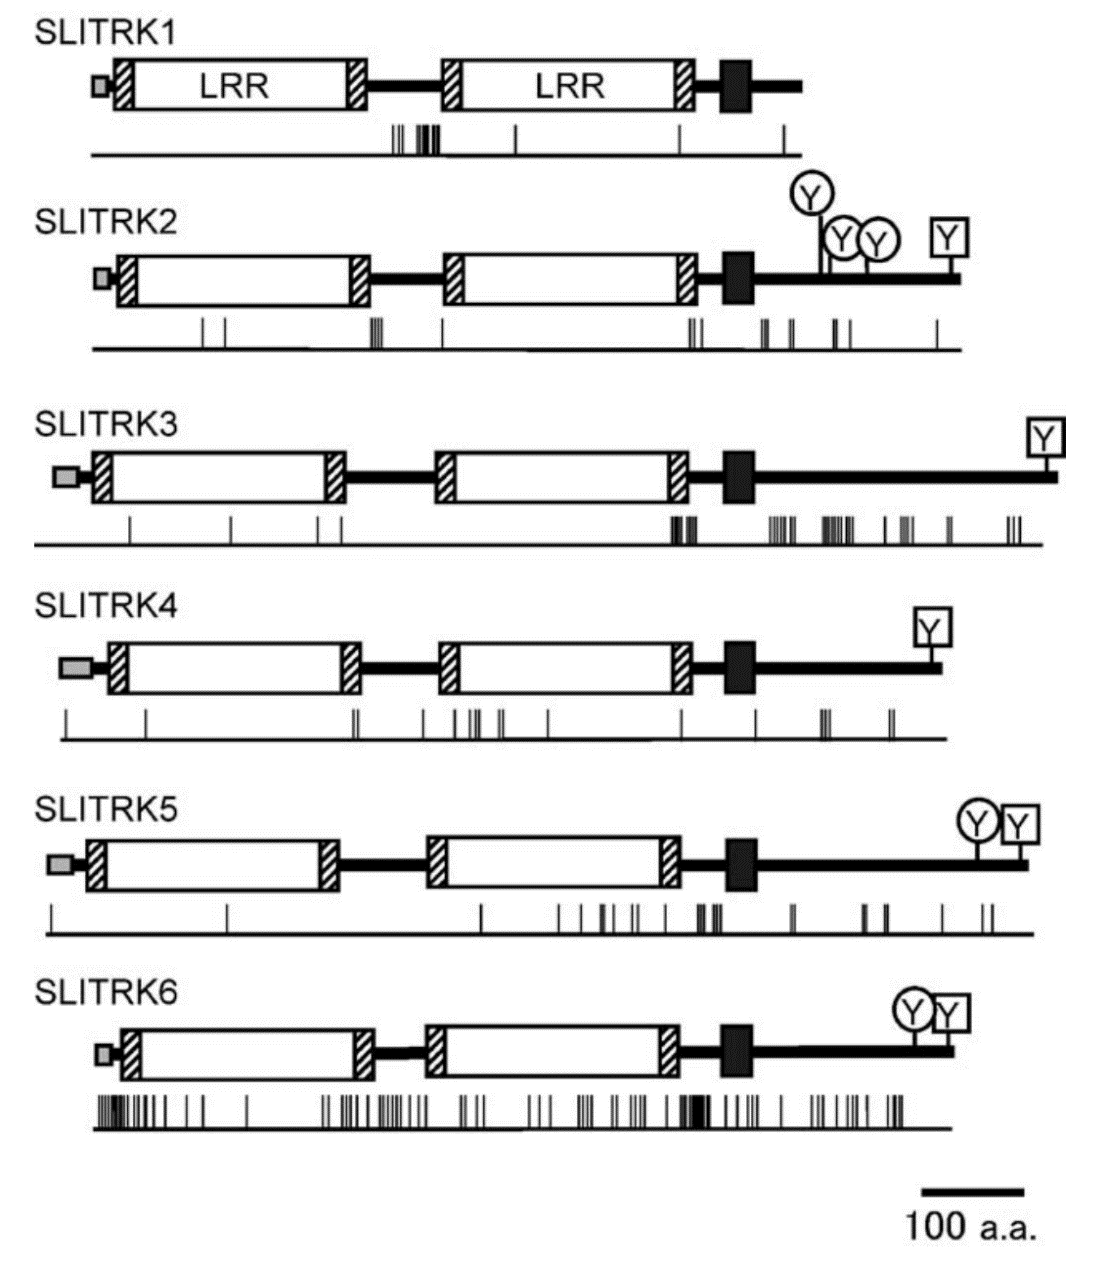 Structure of human SLITRK proteins. 